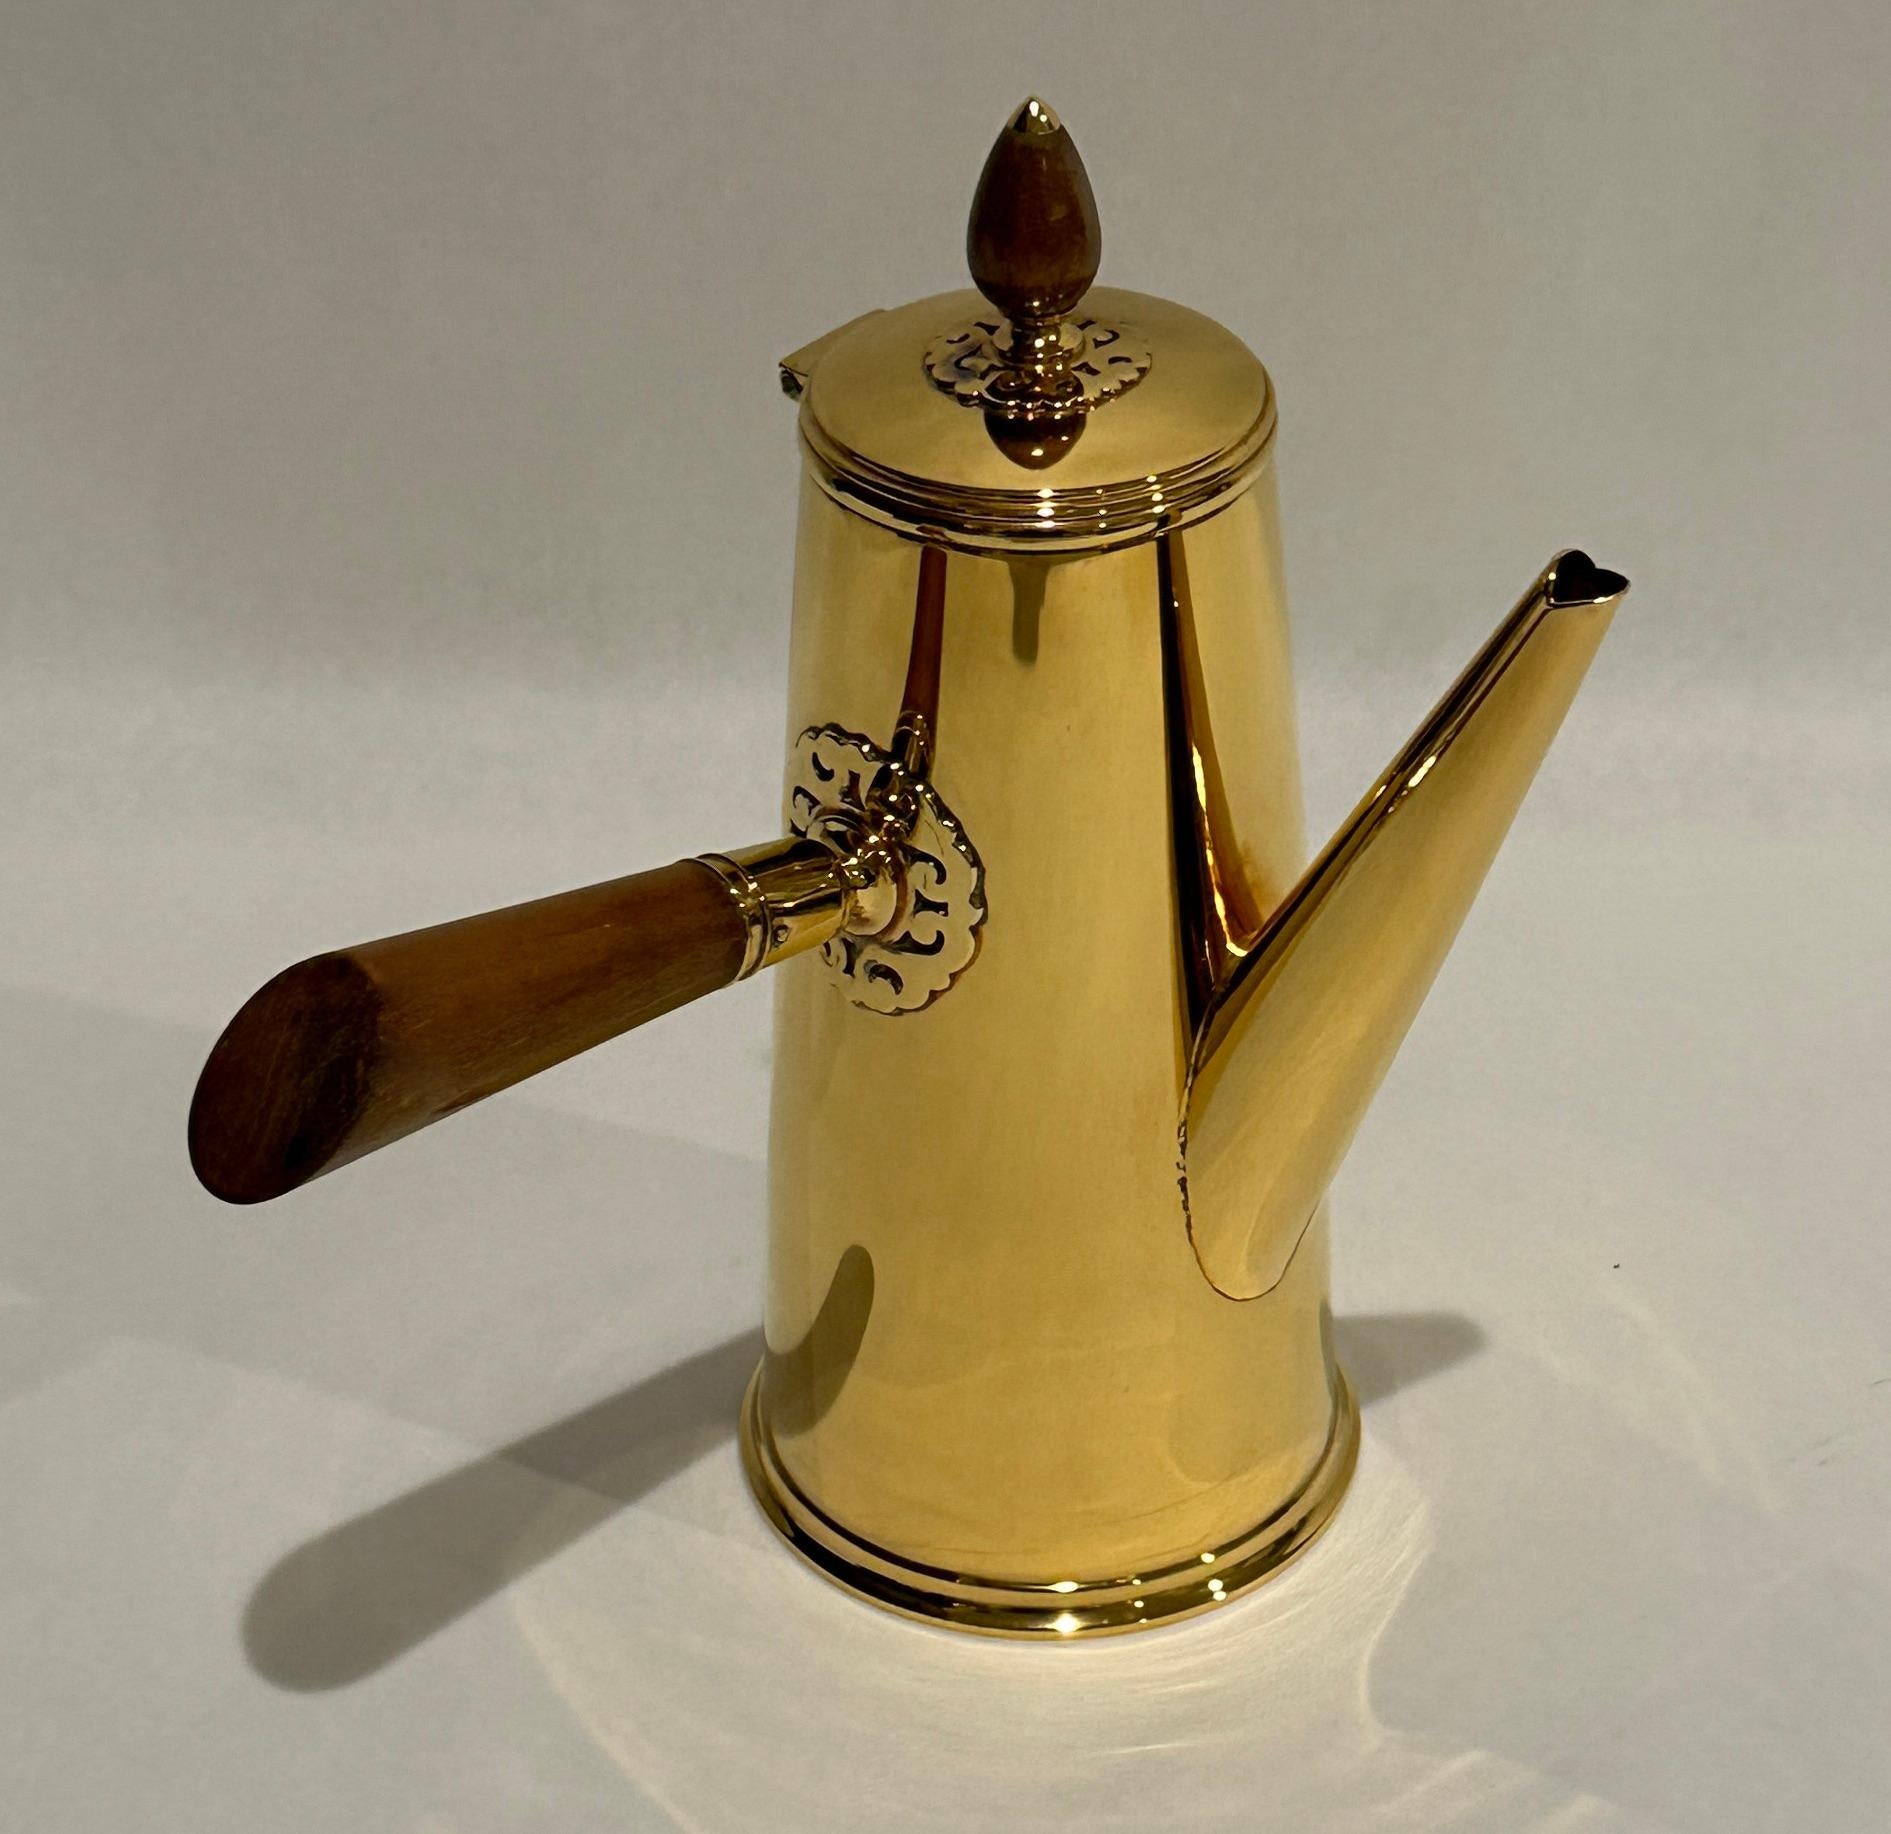 Unusual and fine quality Vermeil Tiffany & Co. sterling silver chocolate pot with turned wood handle and finial set into decorative appliqué.